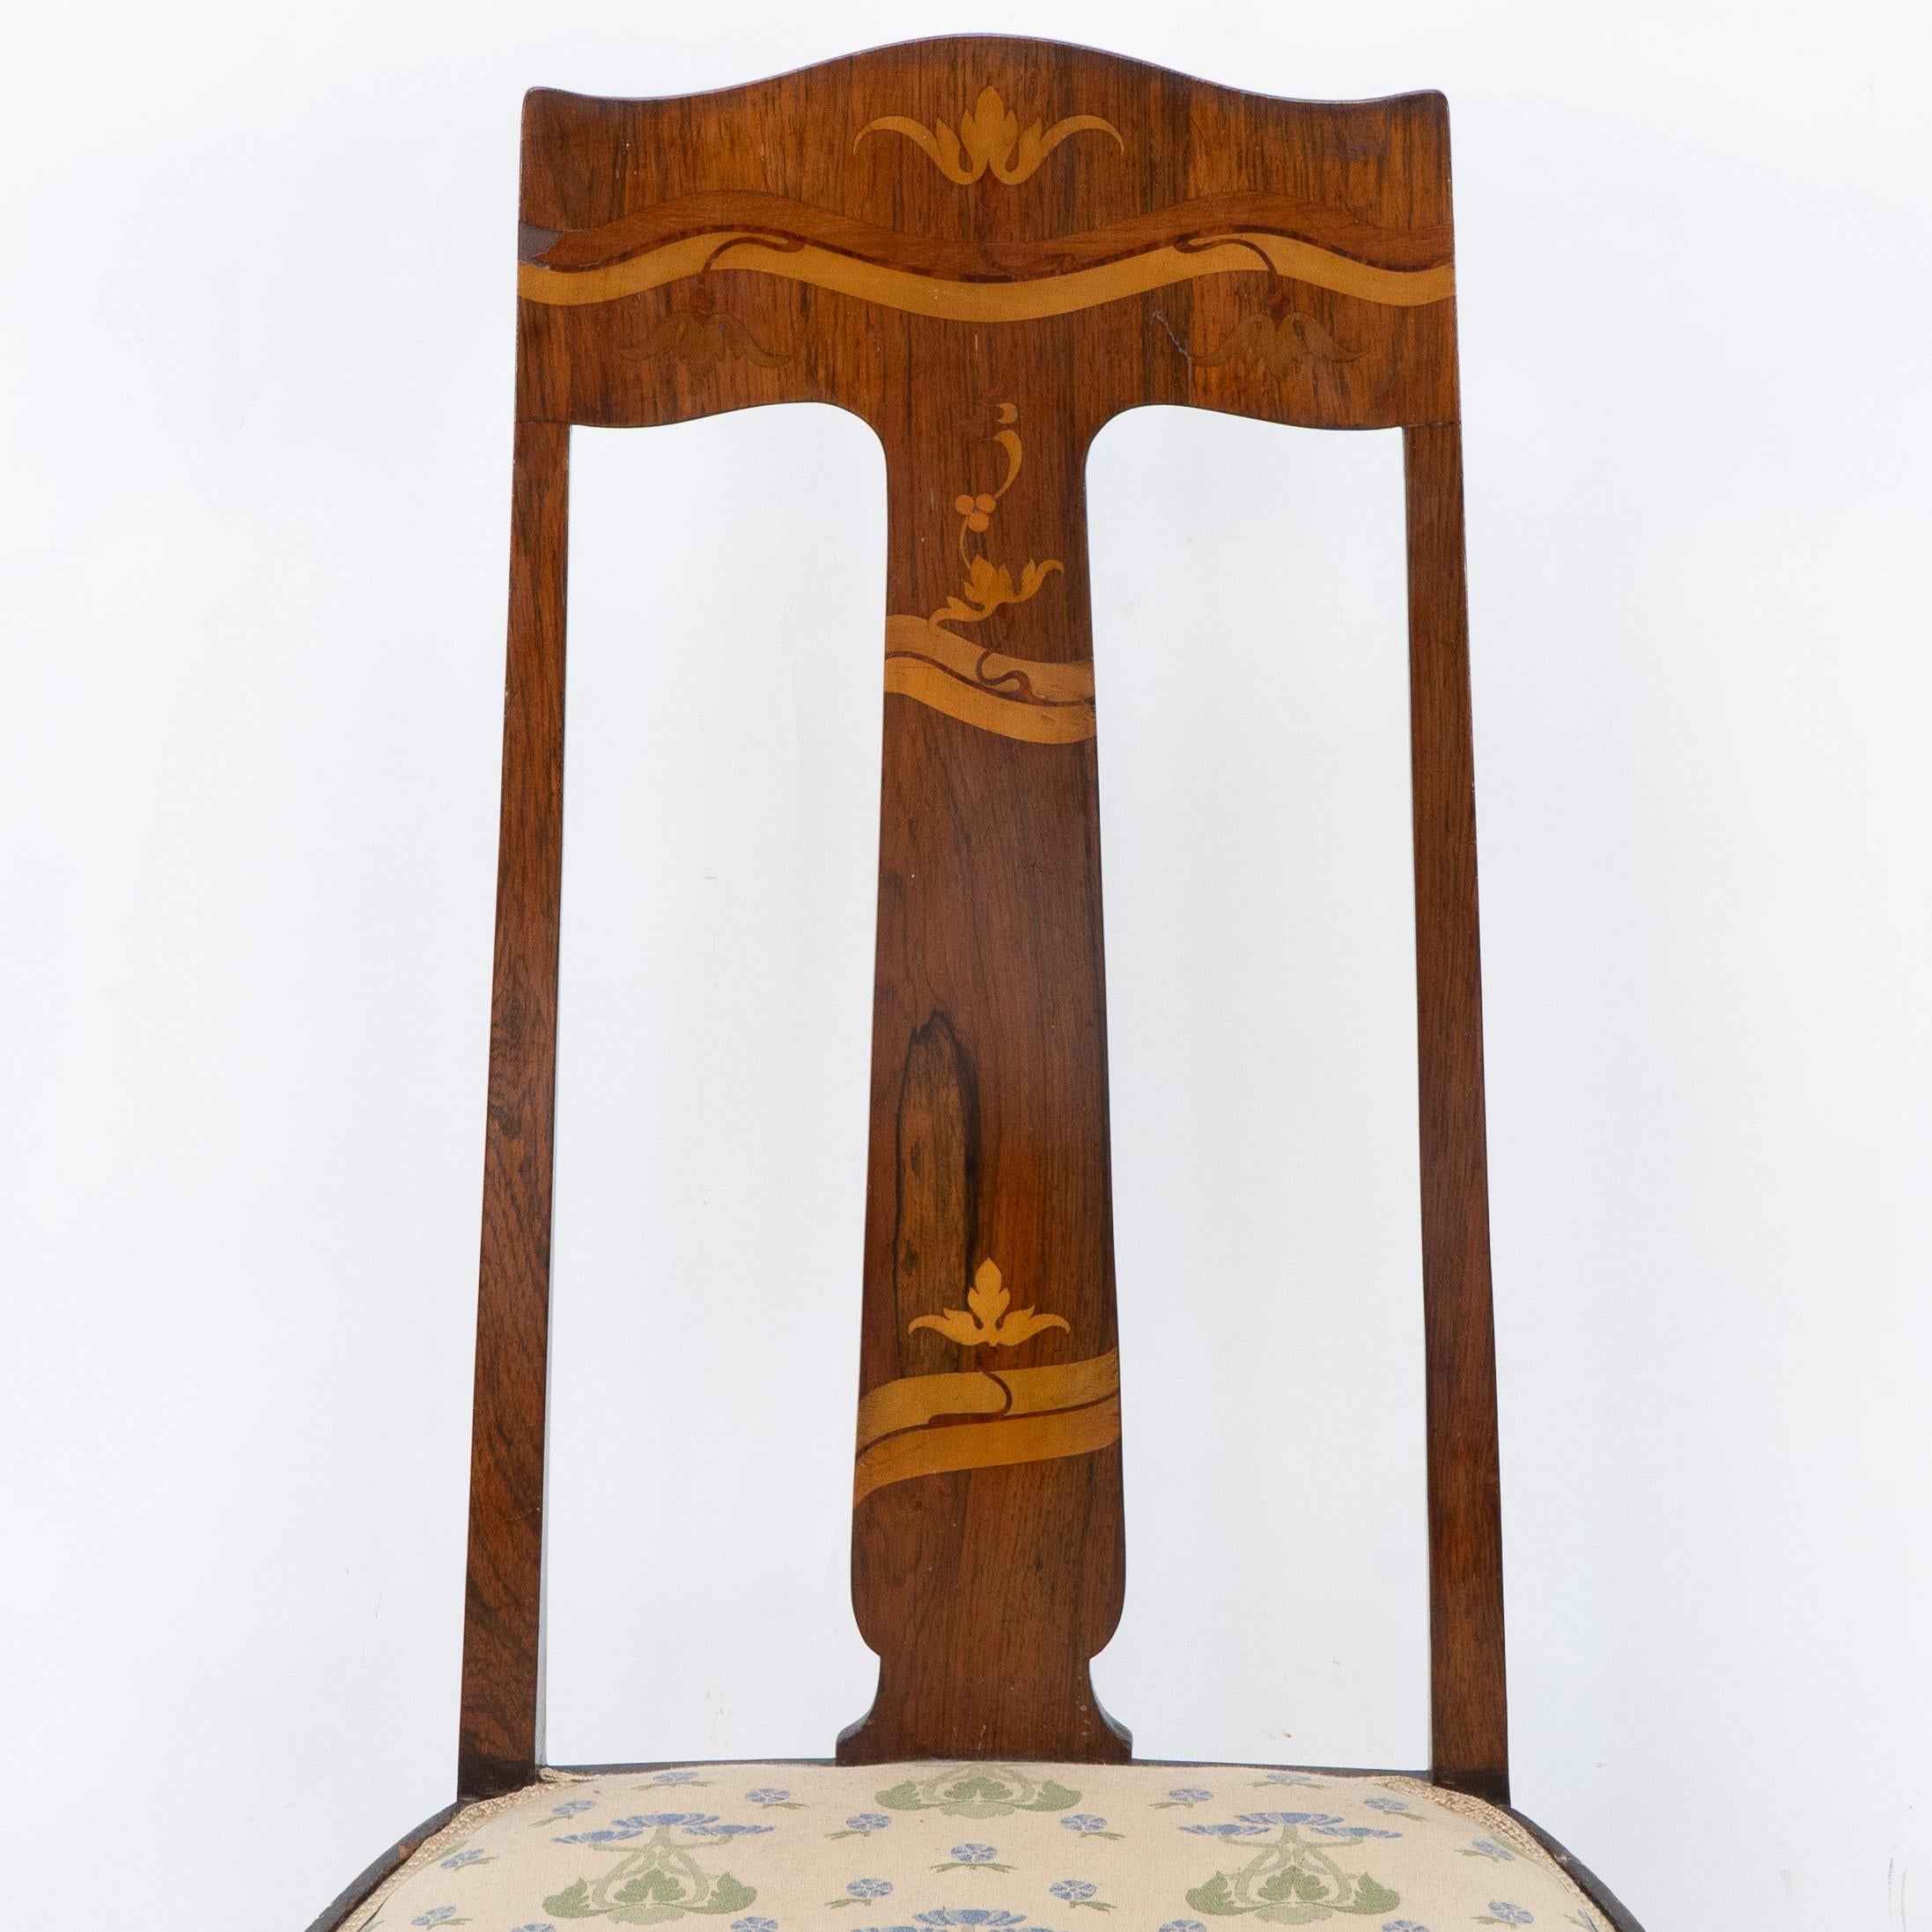 Hand-Crafted Jas Shoolbred. Arts & Crafts Mahogany Rosewood Chair With stylized Floral Inlay For Sale